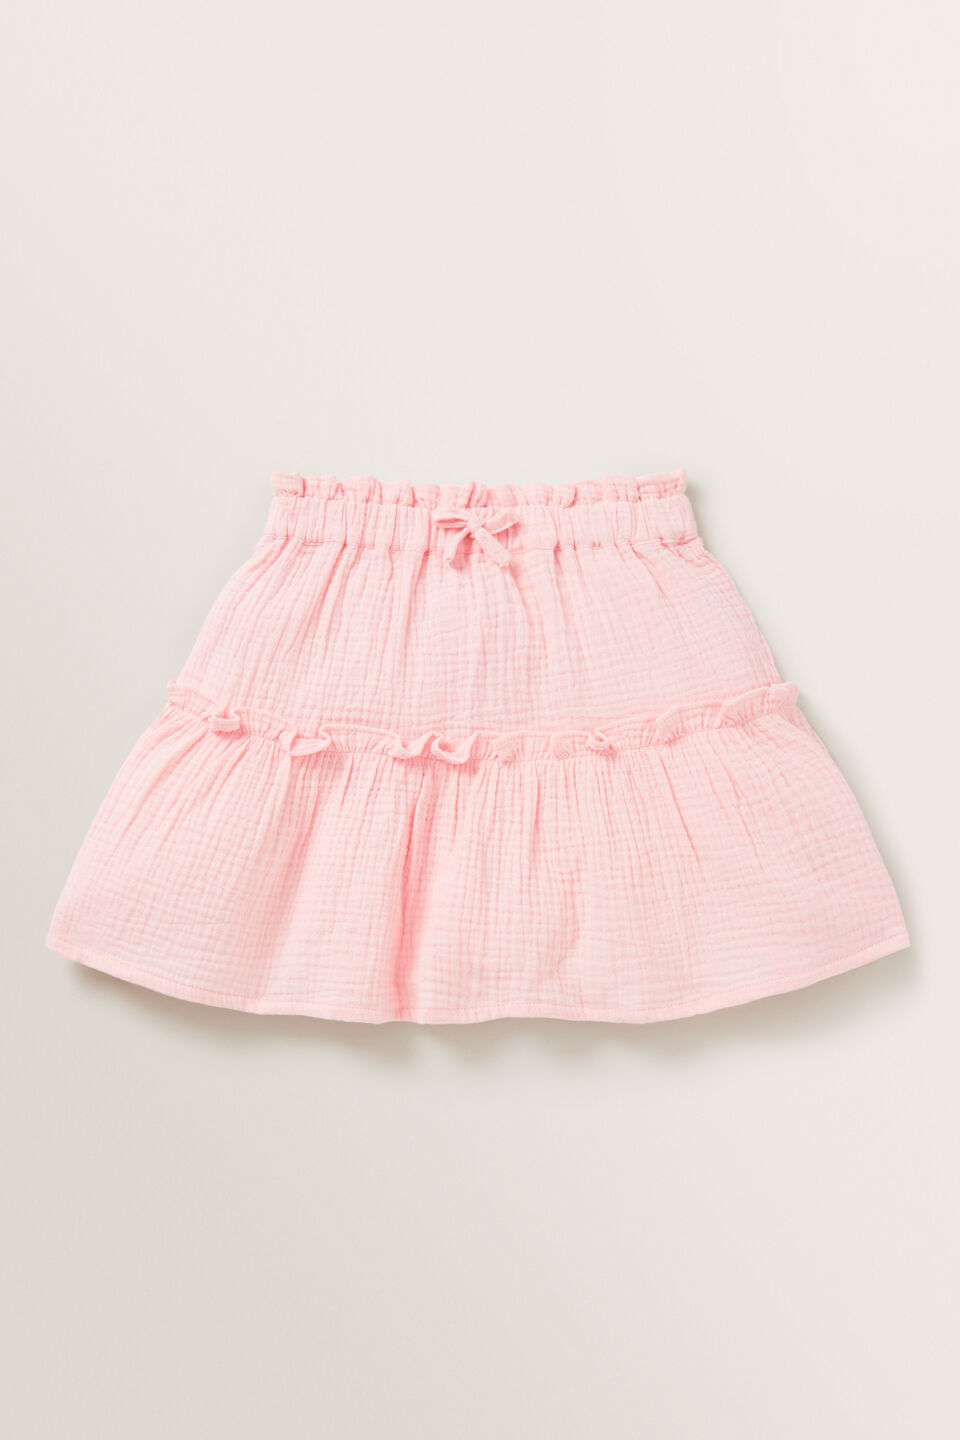 Cheesecloth Skirt  Dusty Rose